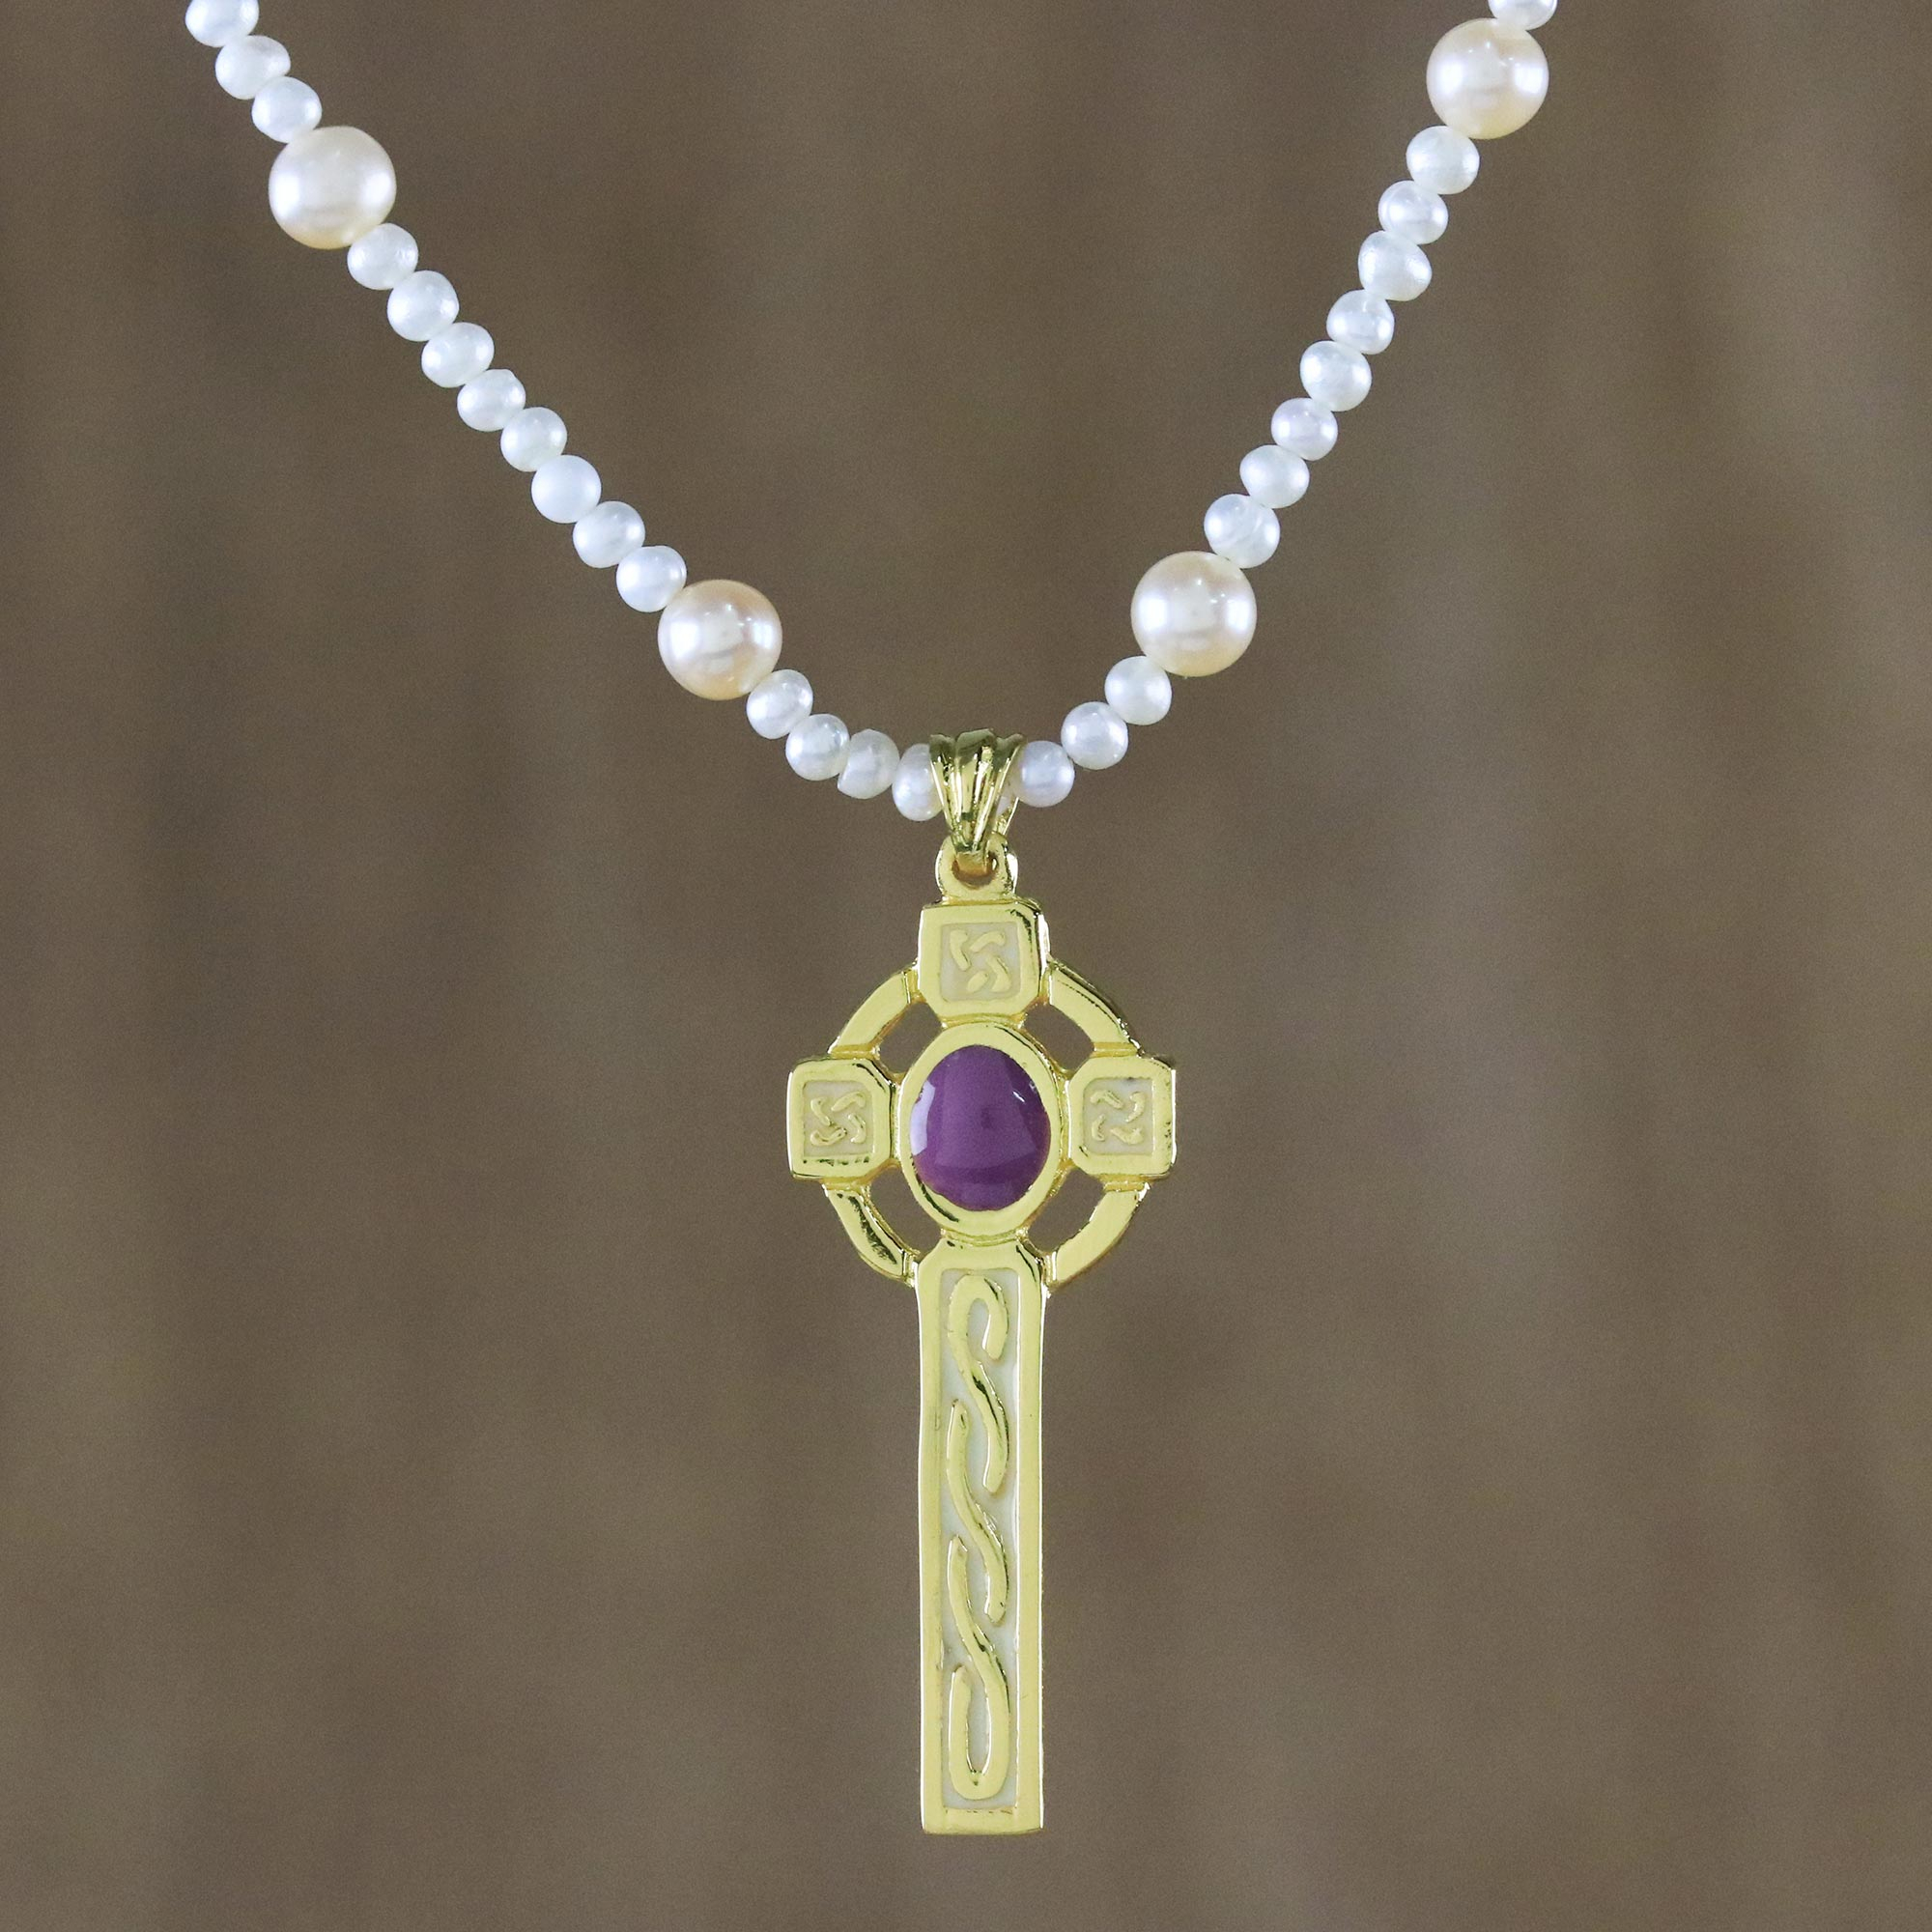 Luther's Seal Pectoral Cross